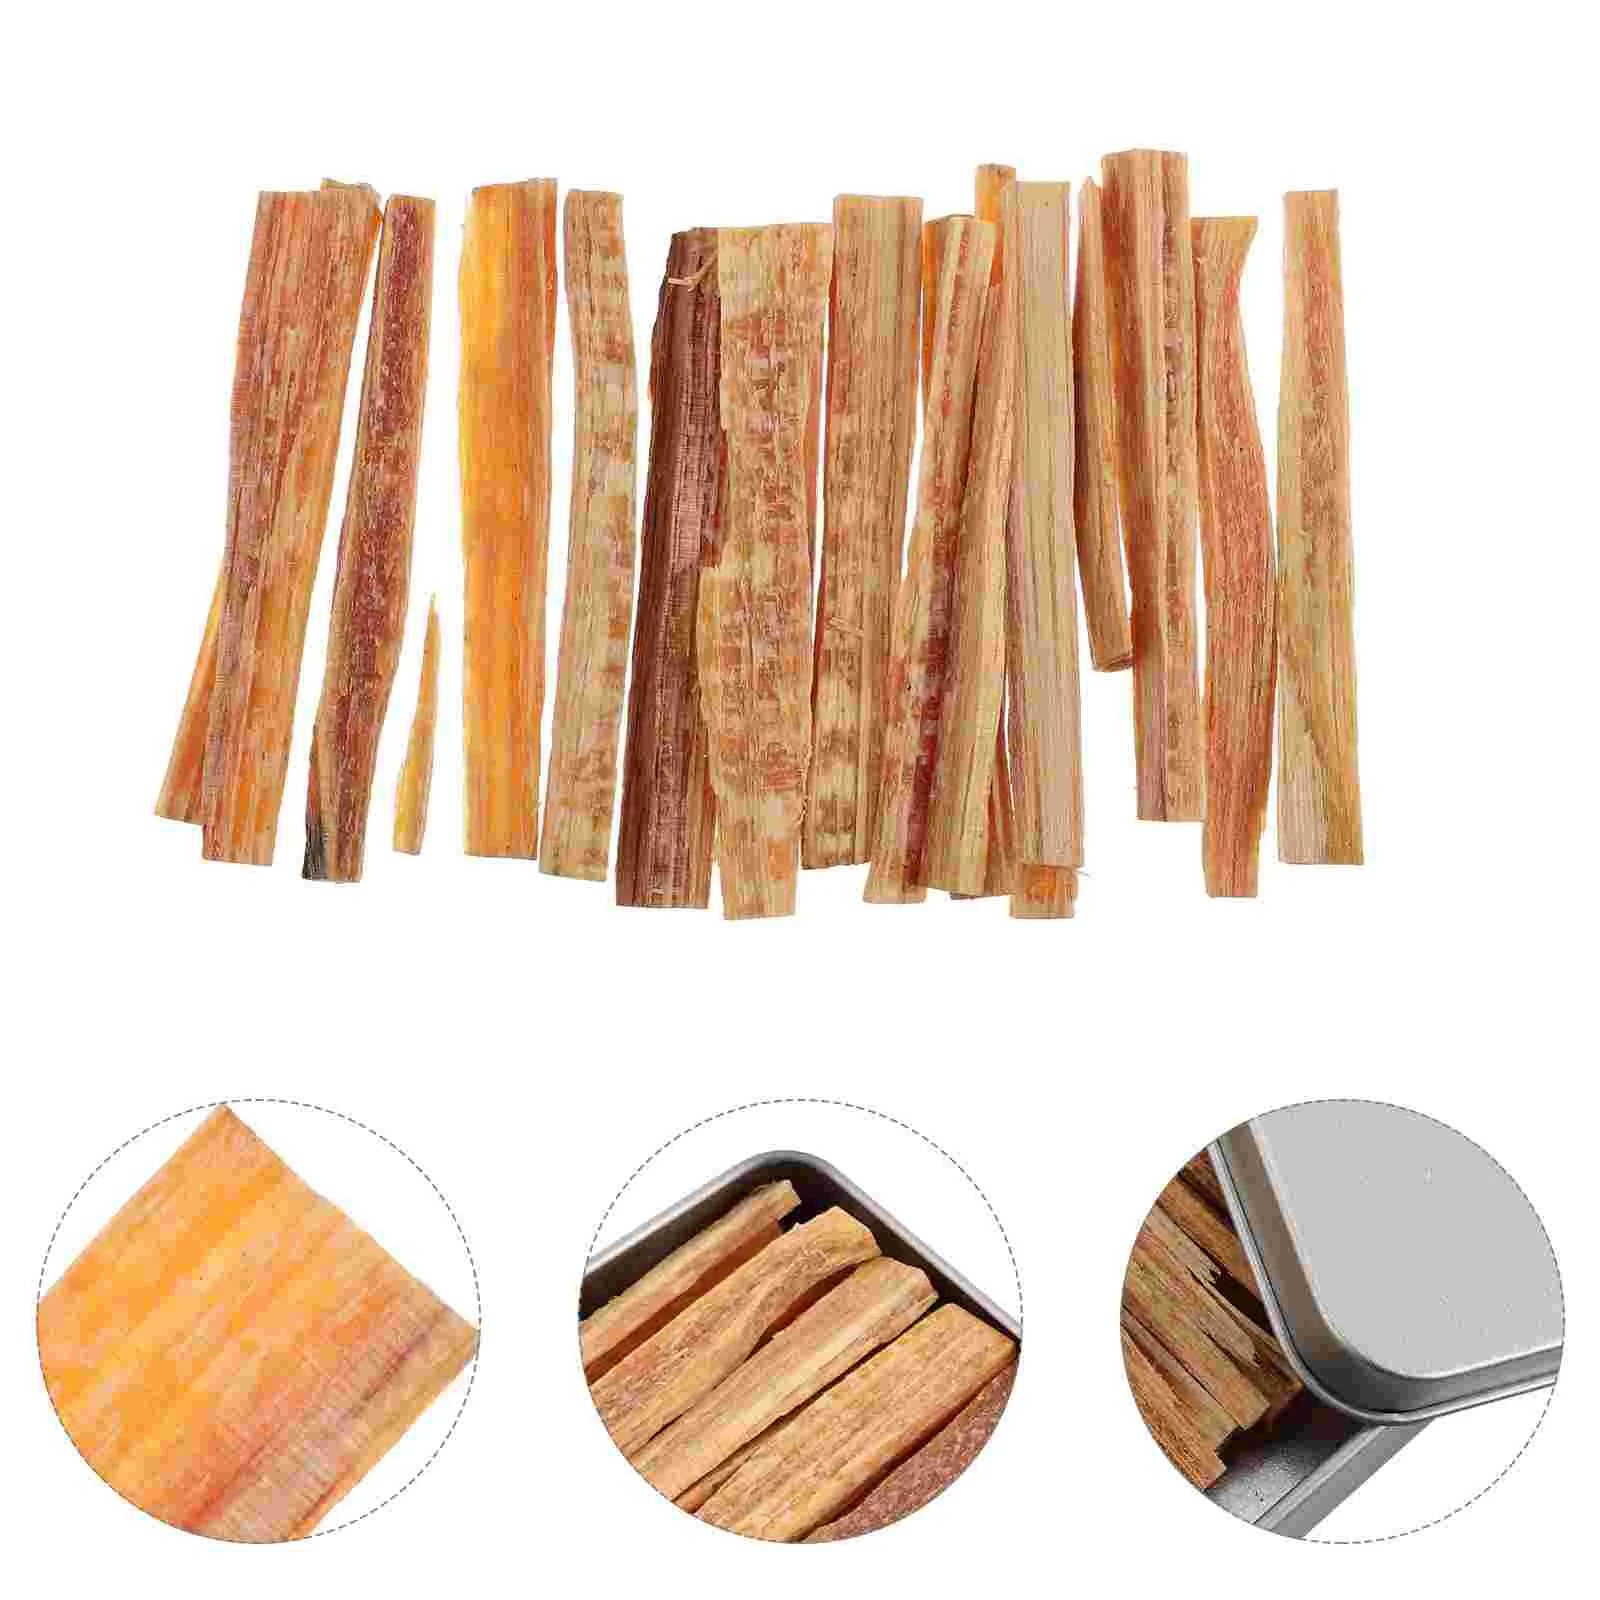 

Fire Strip Wooden Starter Burner Kit Eco Lighter Sticks Camping Ignition Tools Quick Survival Charcoal Supplies